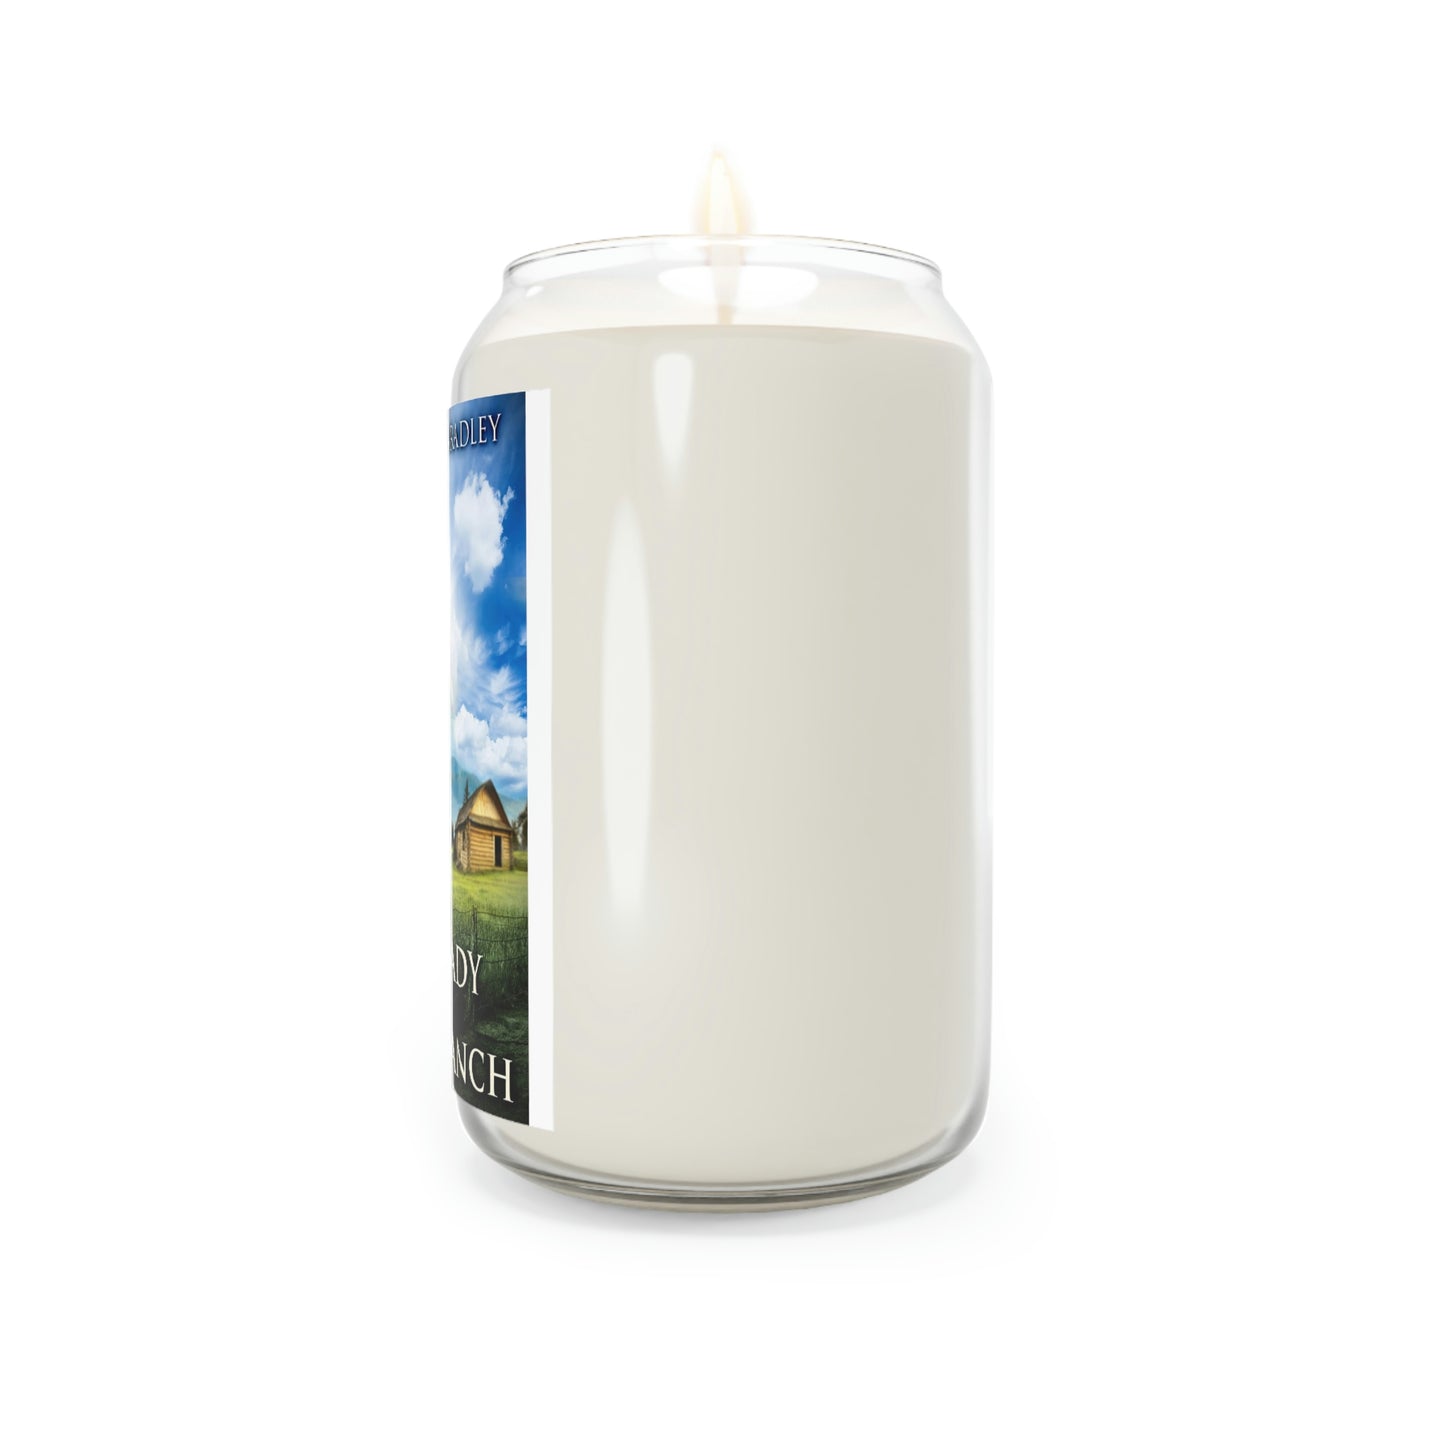 The First Lady Of Hardy Ranch - Scented Candle